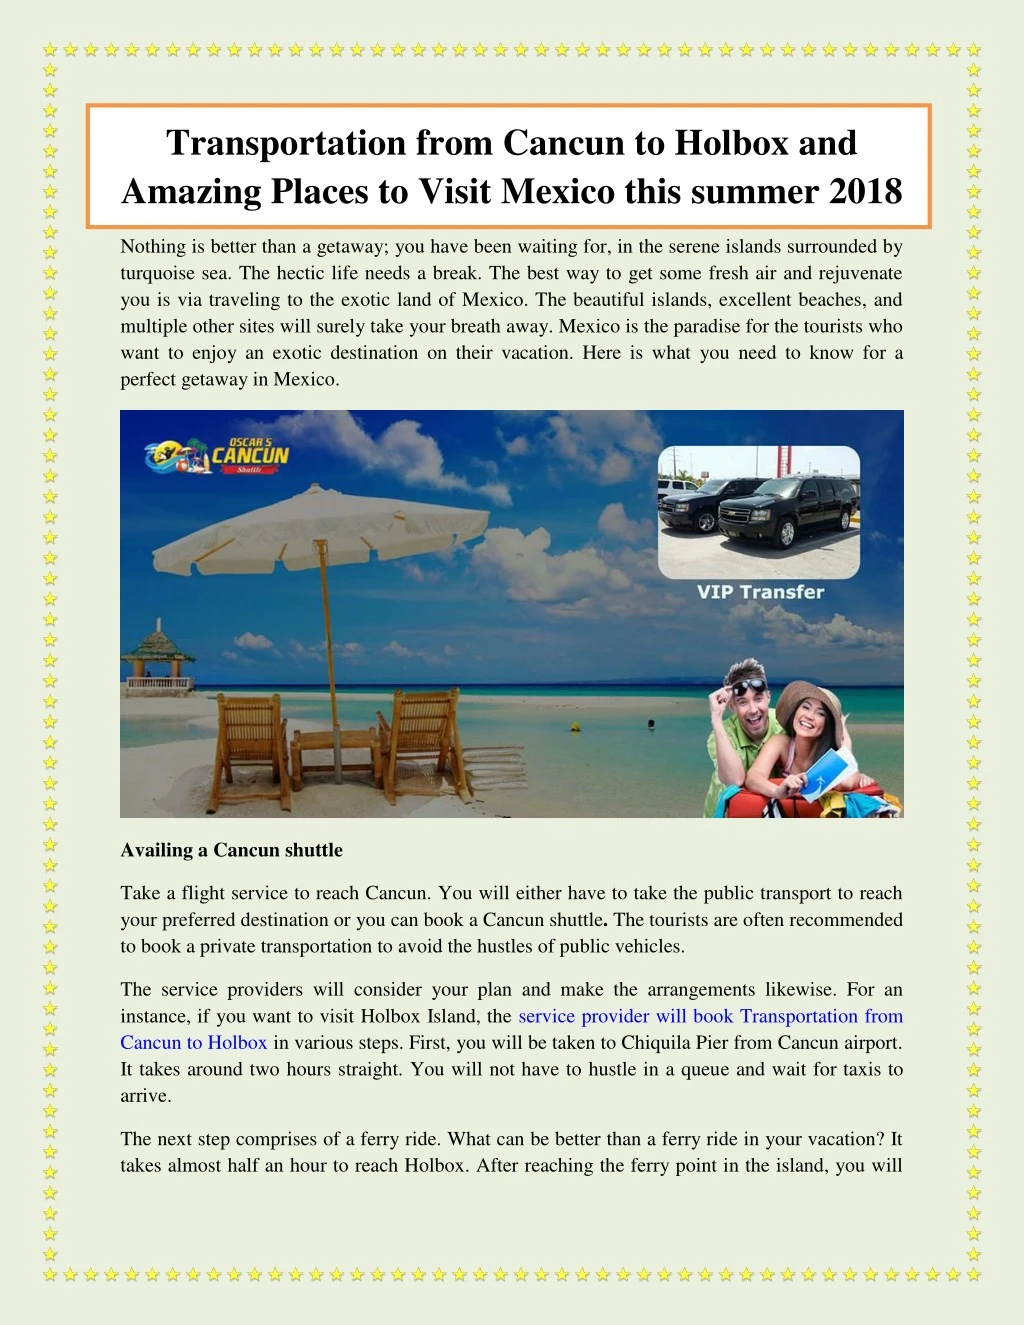 cancun airport shuttle to holbox